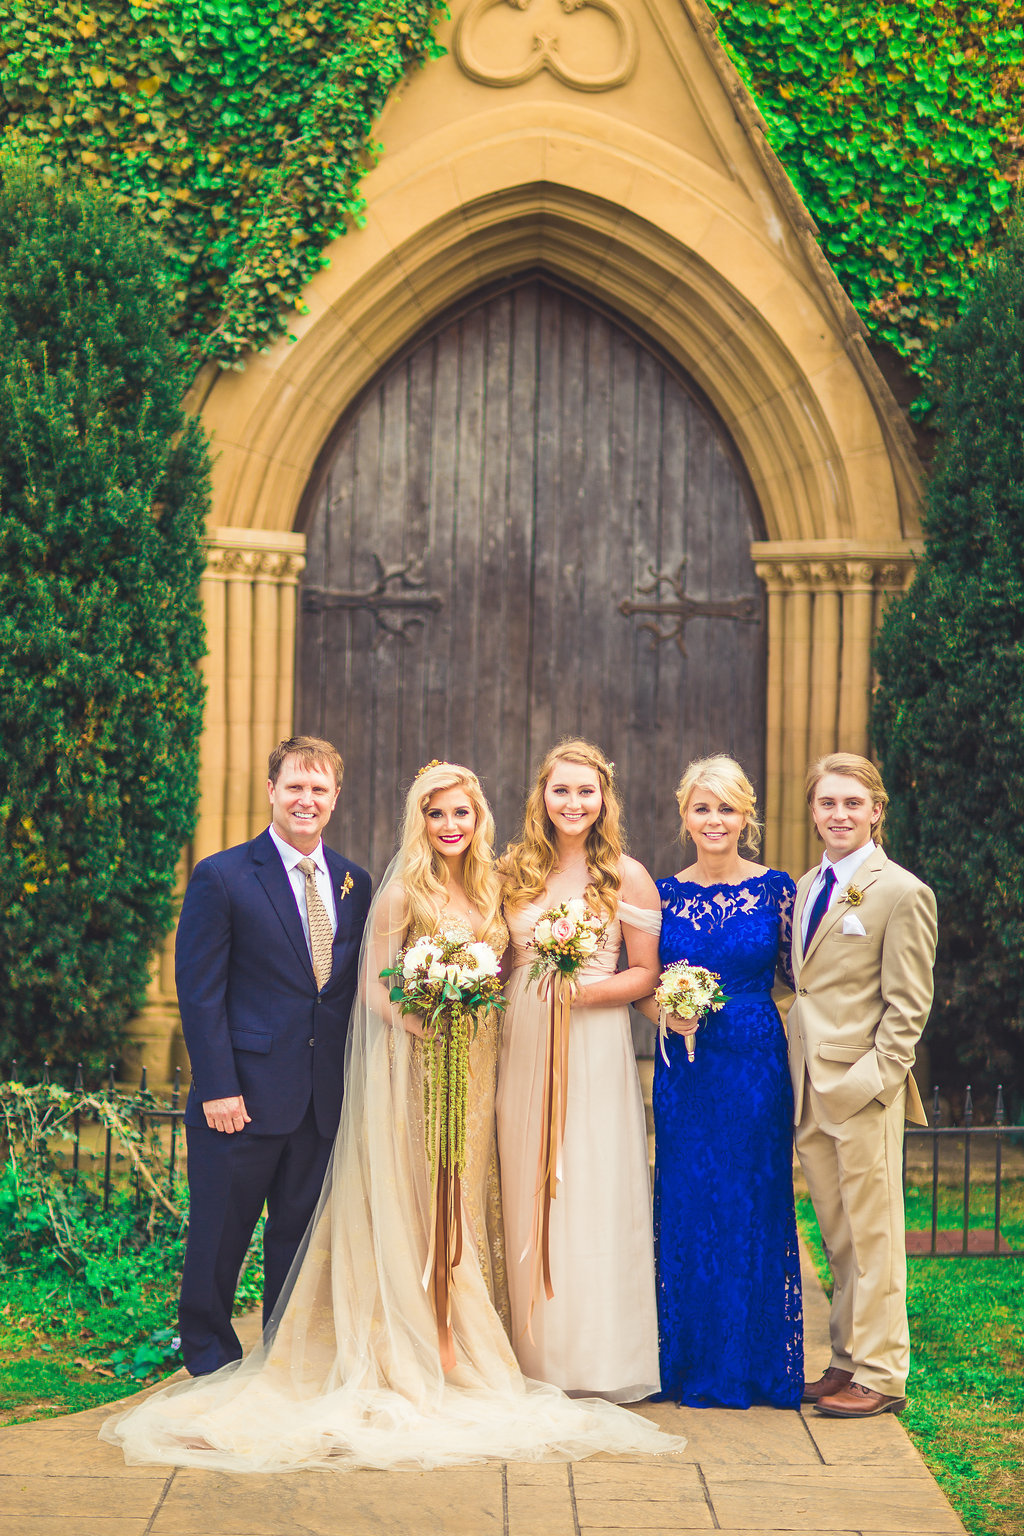 Wedding Photograph Of Bride and Family of the Bride in Suit and Dress Los Angeles